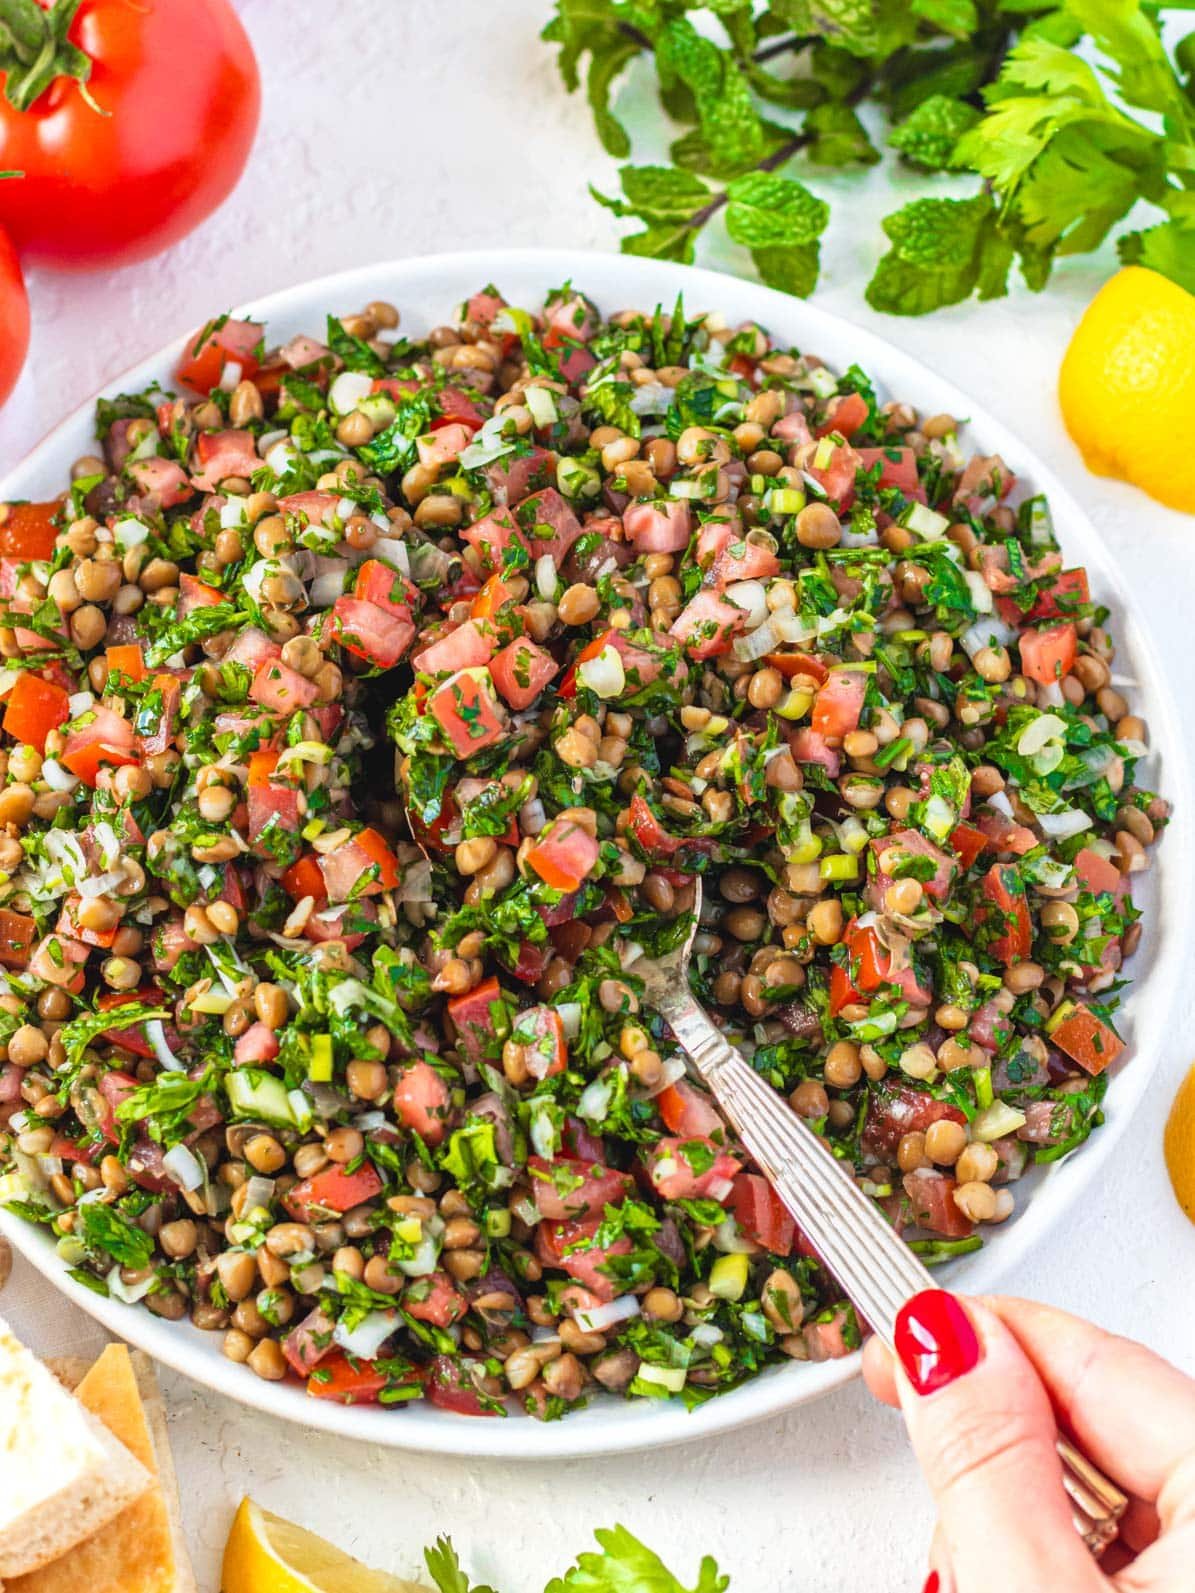 Lentil tabbouleh on a plate with a hand and red nail